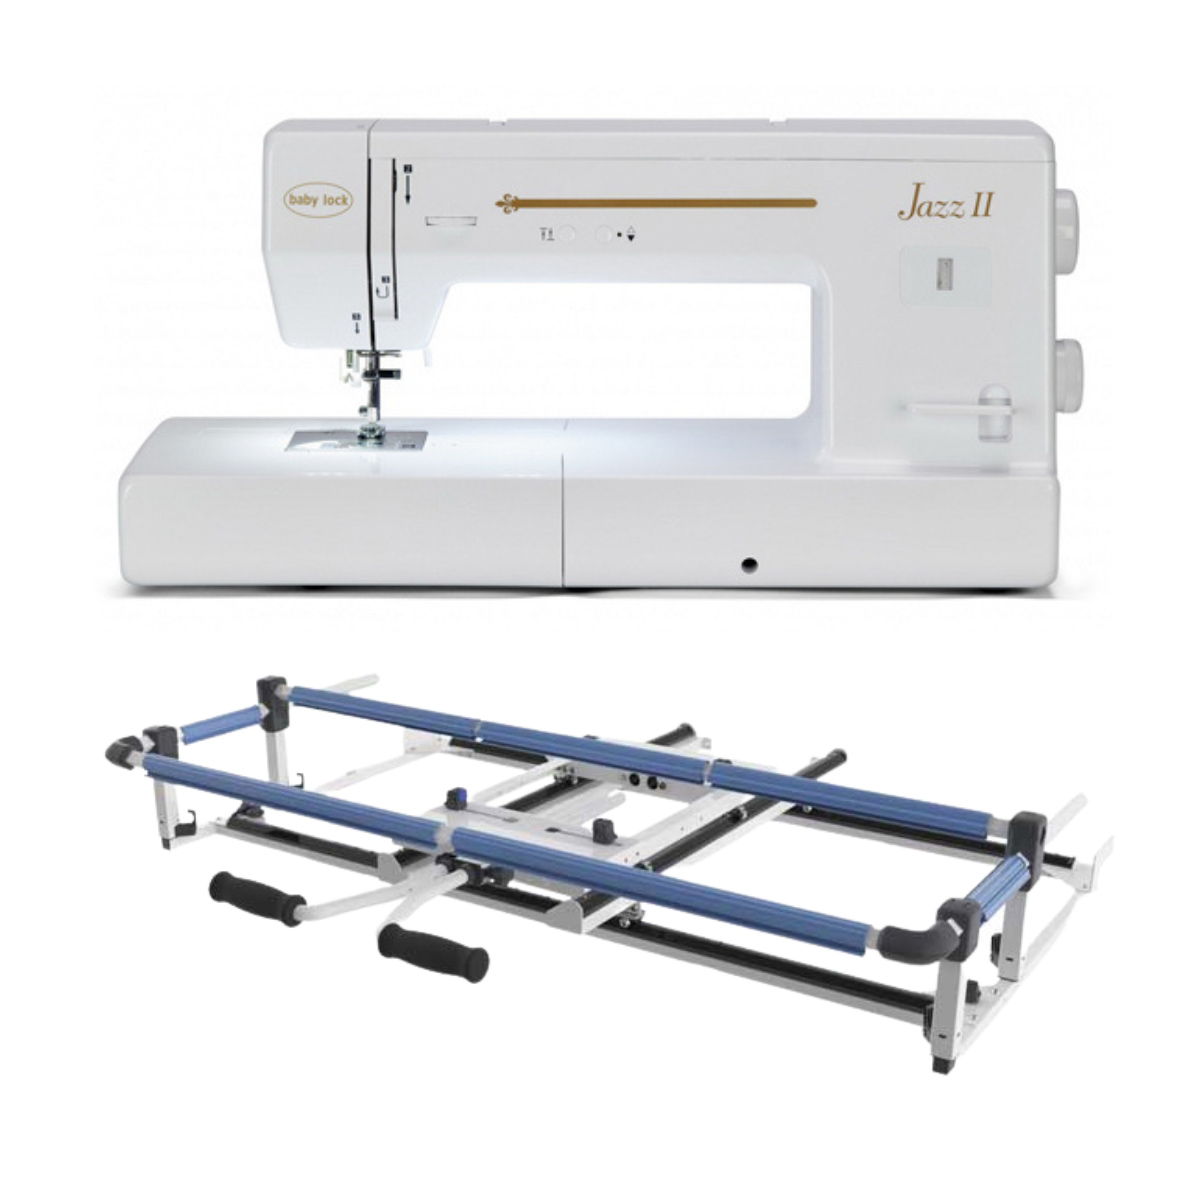 Machines Under $1000 - Moore's Sewing